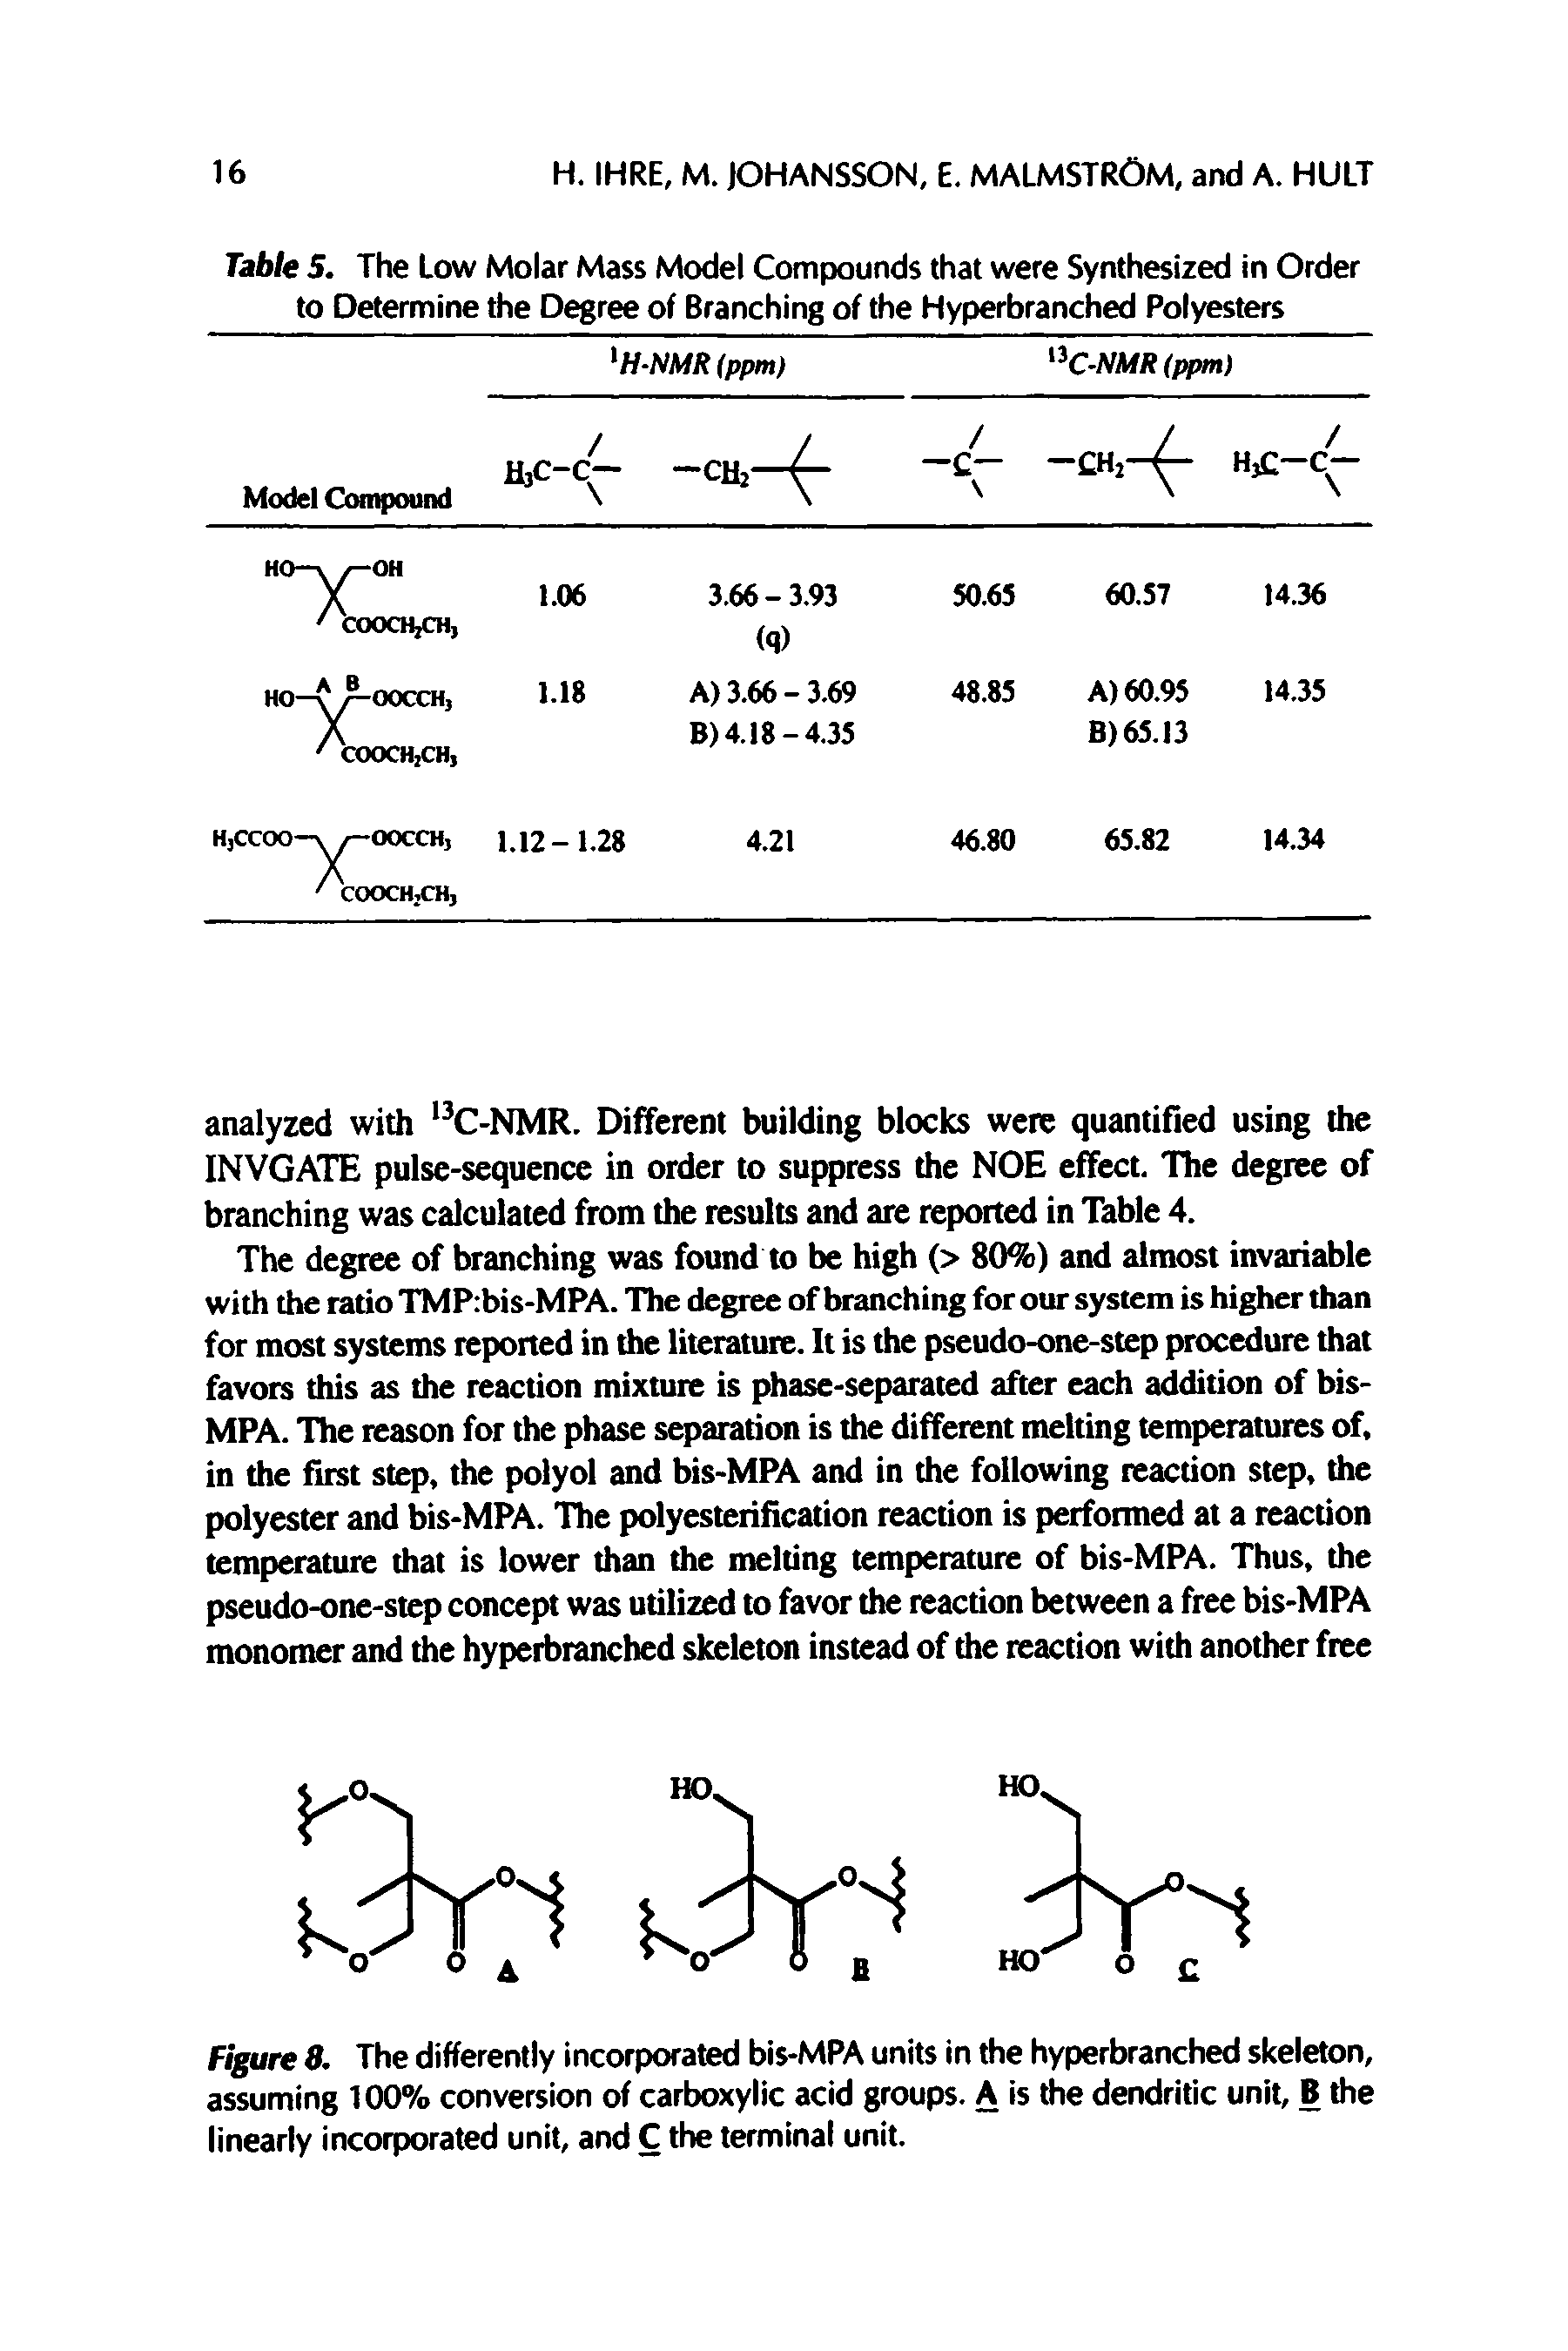 Table 5. The Low Molar Mass Model Compounds that were Synthesized in Order to Determine the Degree of Branching of the Hyperbranched Polyesters...